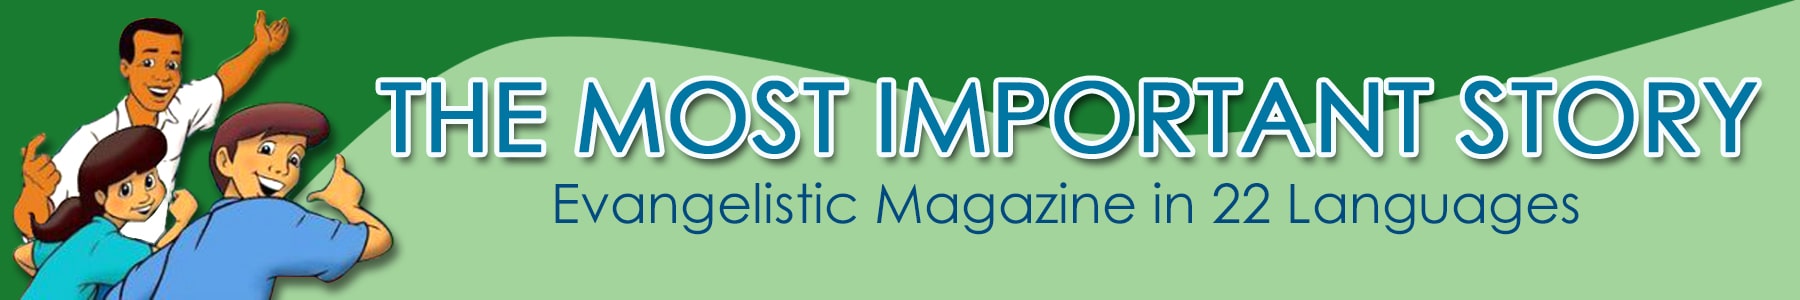 The Most Important Story Evangelistic Magazine in 22 Languages